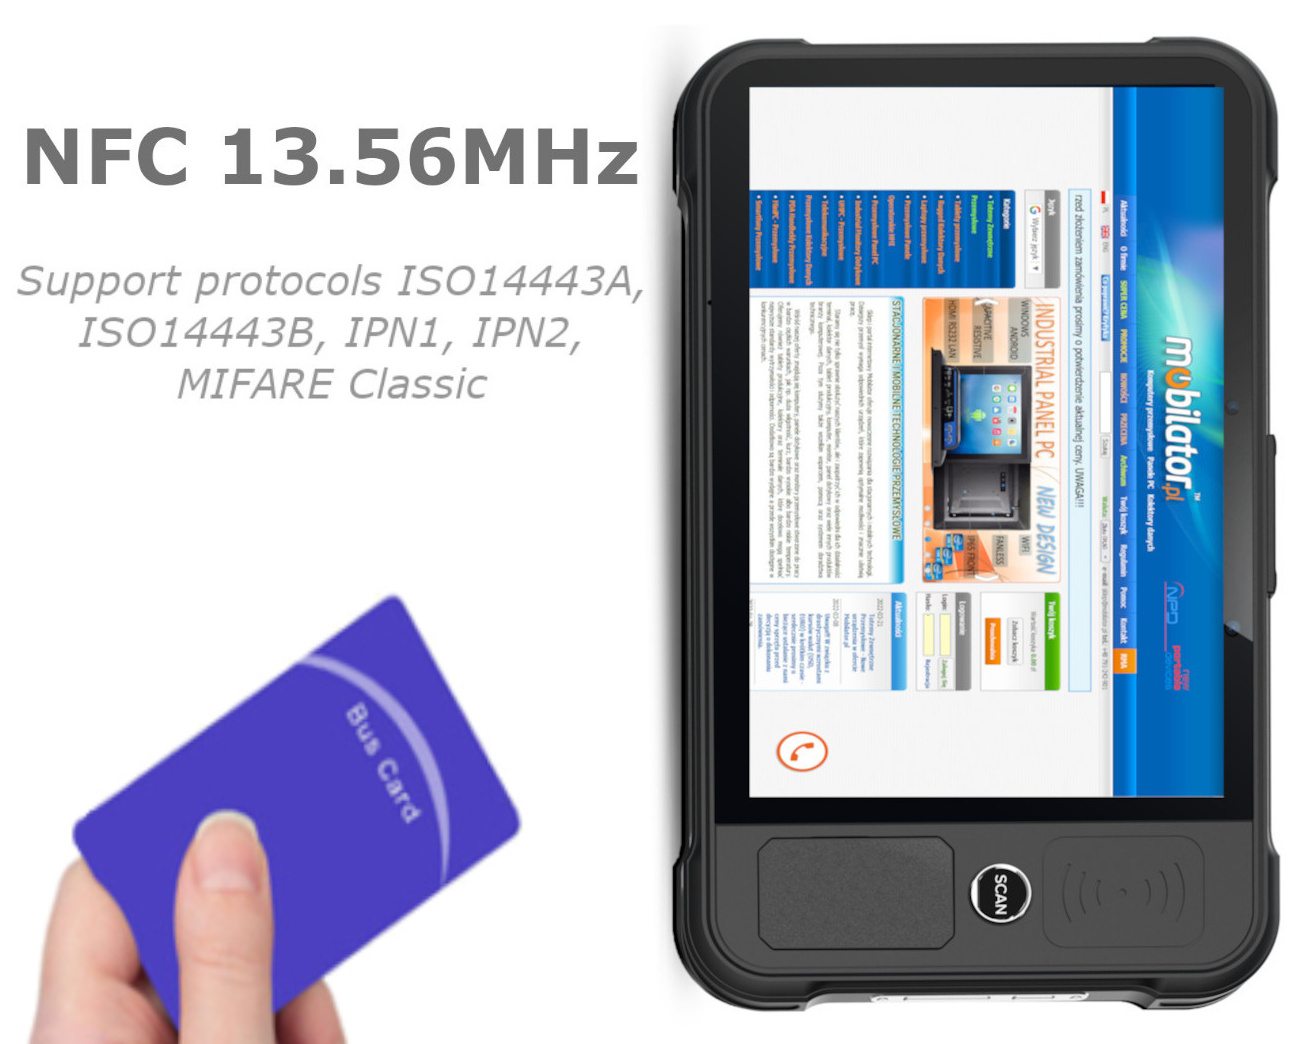 Connectivity of the rugged P80-PE tablet via NFC